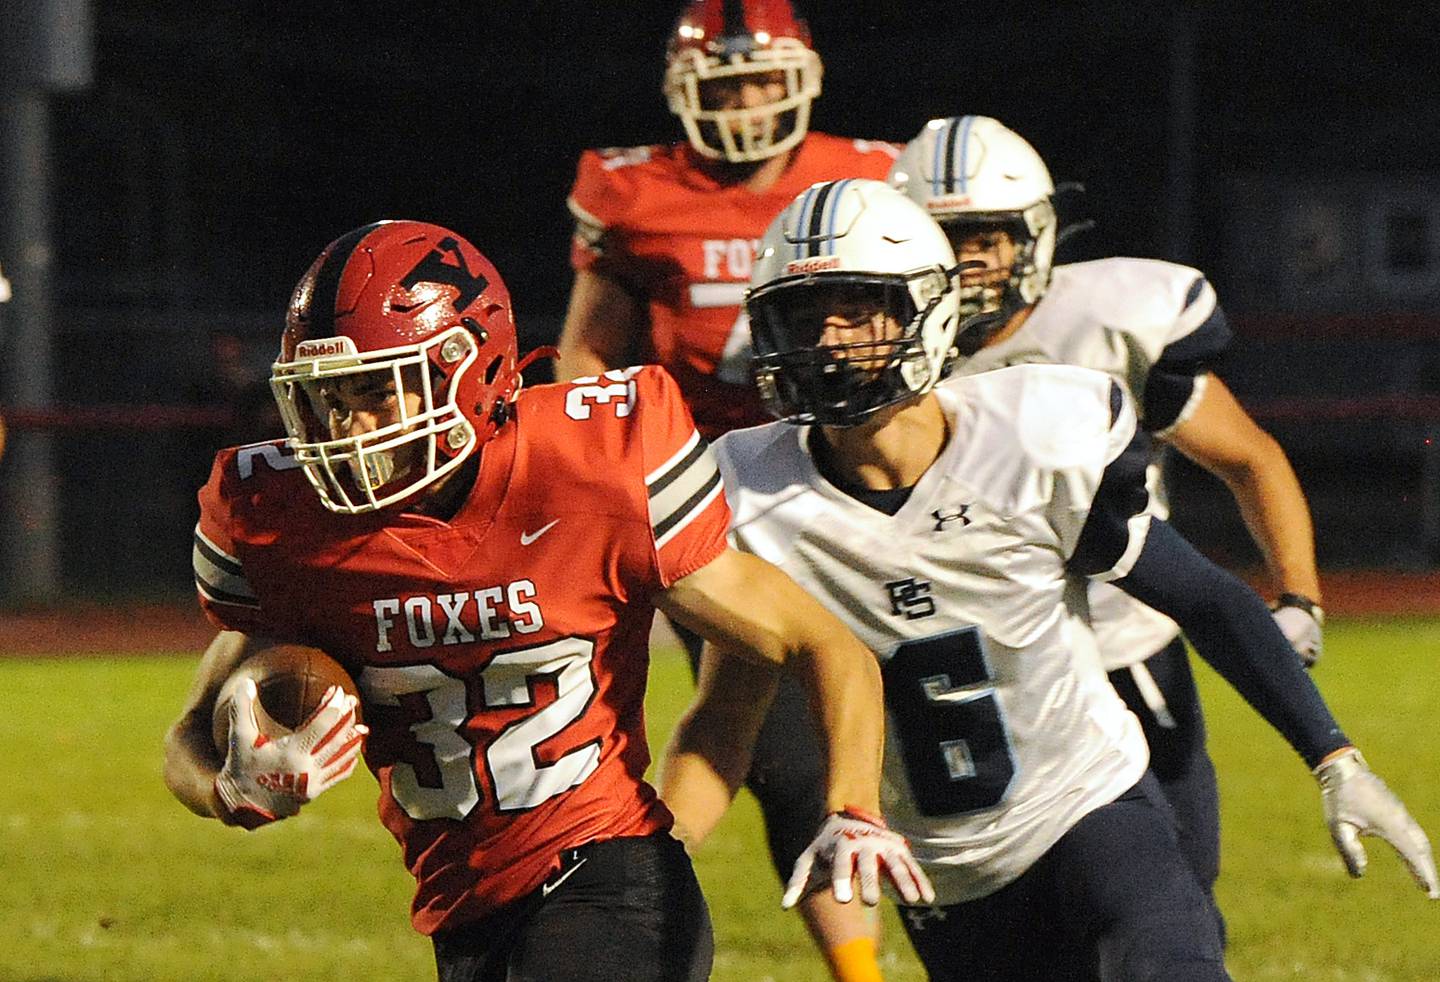 Yorkville running back Gio Zeman (32) gets past Plainfield South safety Liam Drapeau on way to a touchdown during a varsity football game at Yorkville High School on Friday.